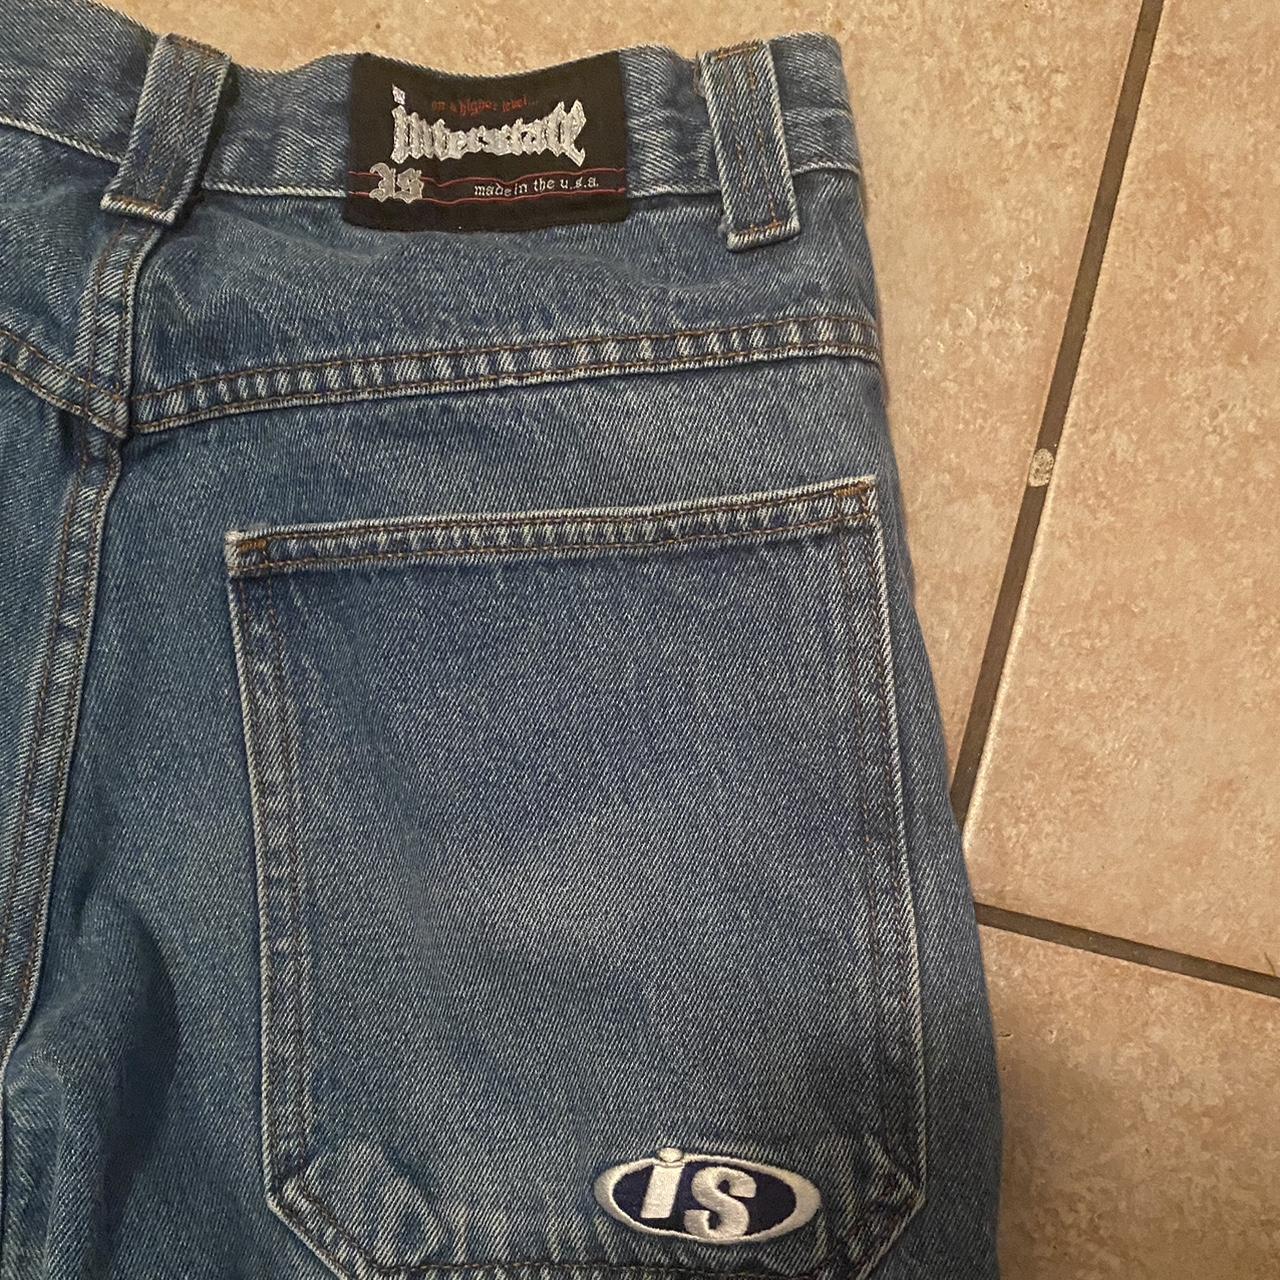 Interstate jeans Rare haven’t seen a pair like this... - Depop